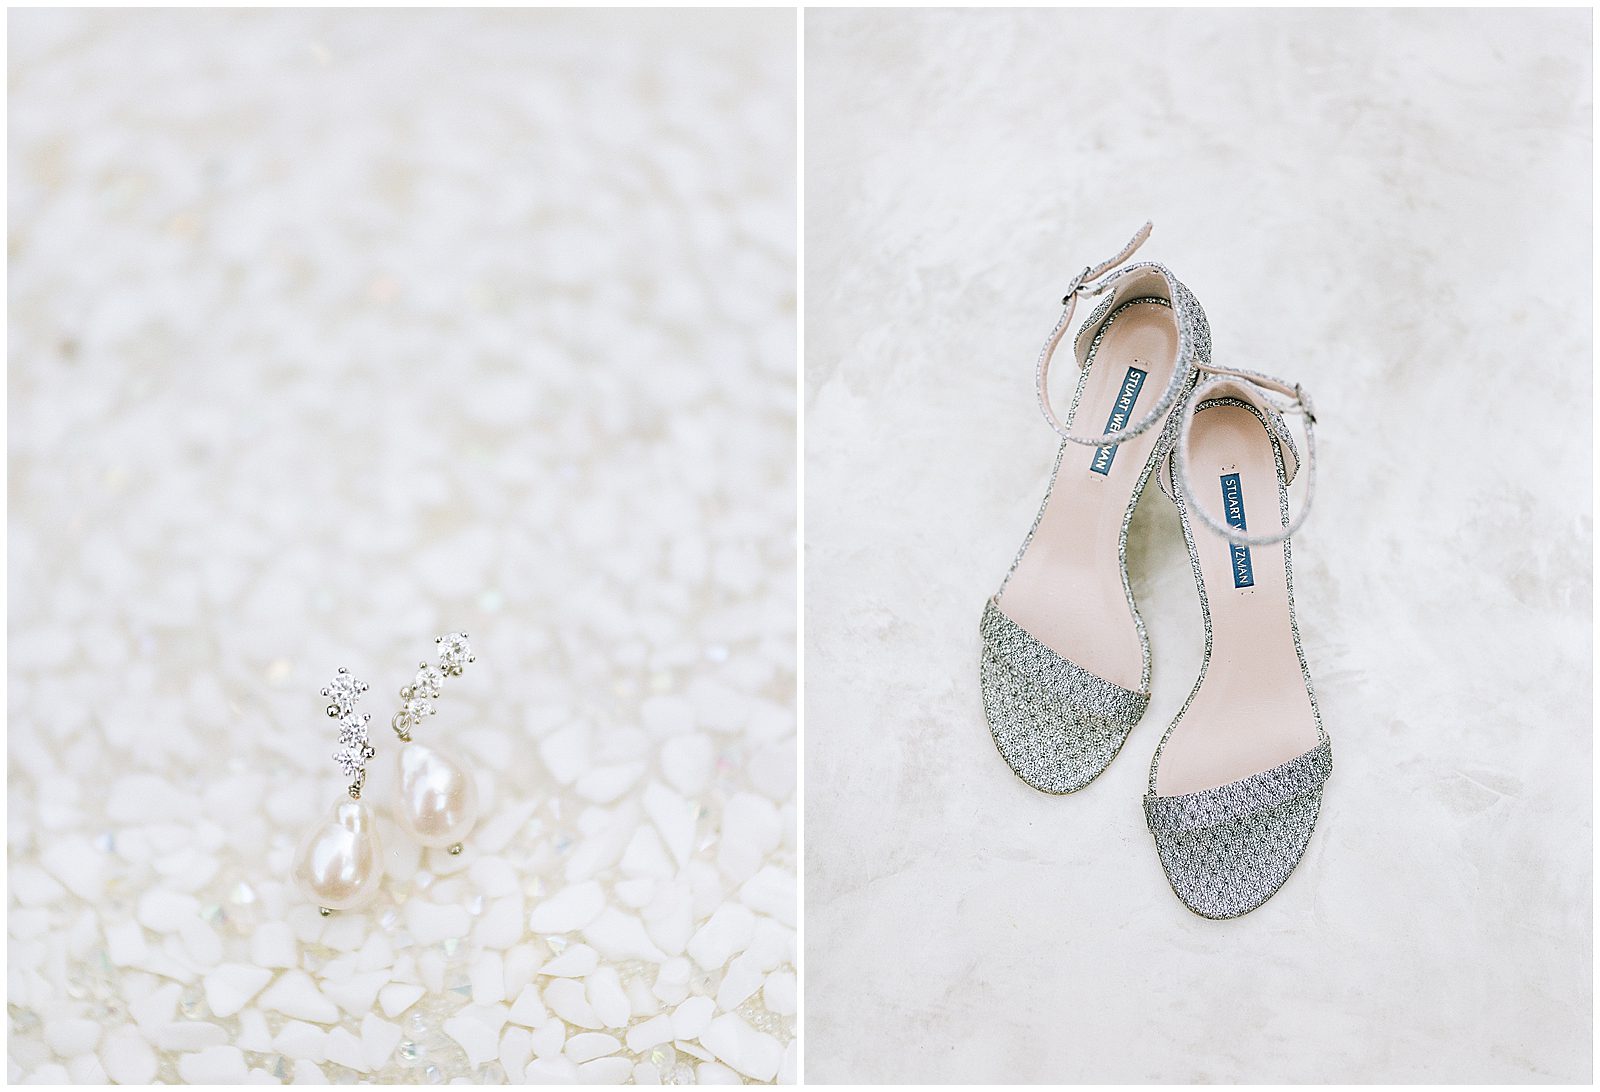 Bridal details earrings and shoes photos